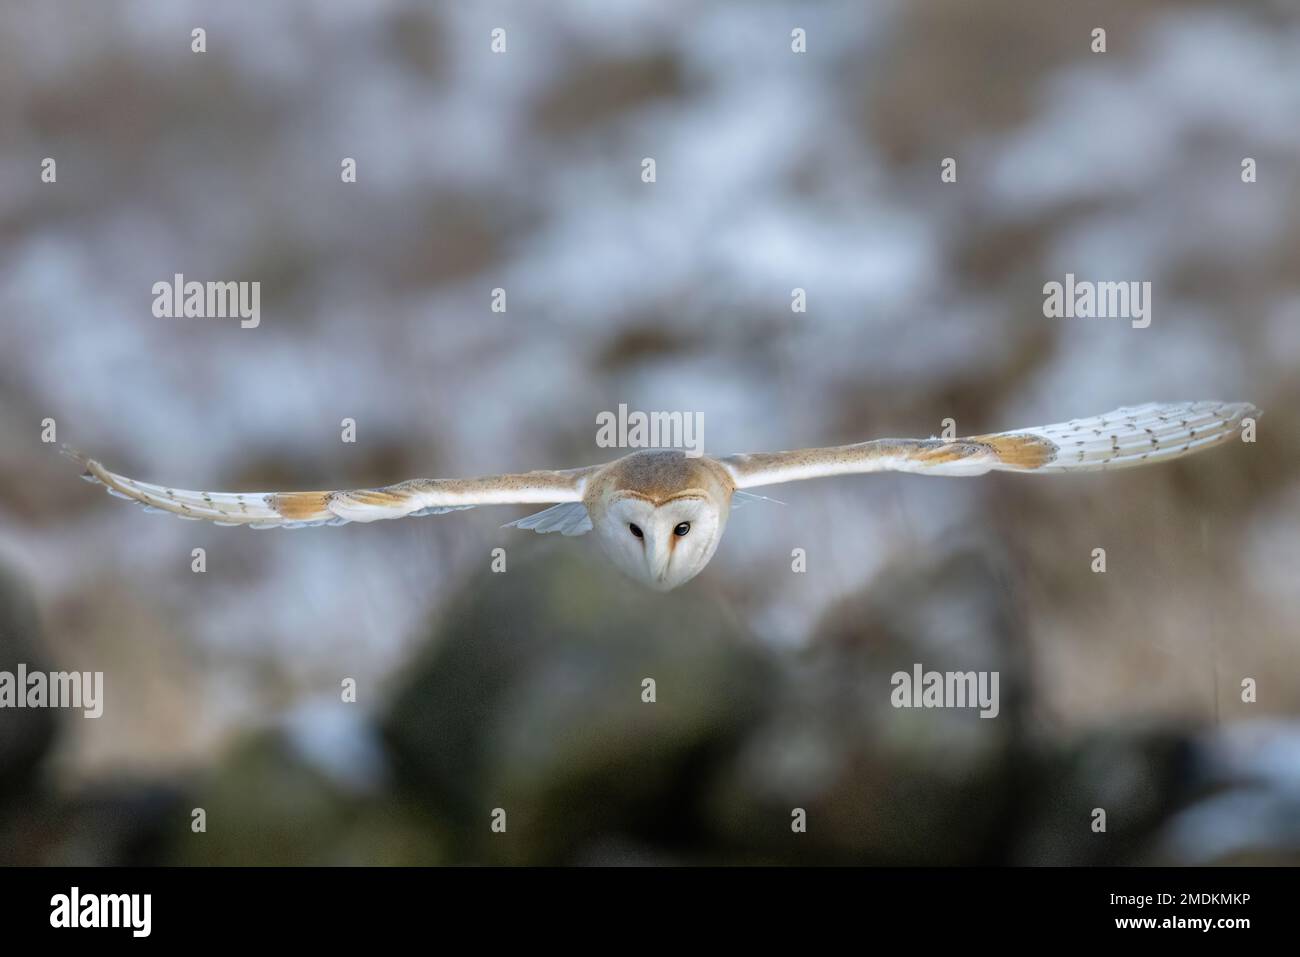 Looking for prey. Yorkshire, UK: THESE STUNNING images taken on last Friday 20th January show a Yorkshire barn owl darting in and out of the falling s Stock Photo